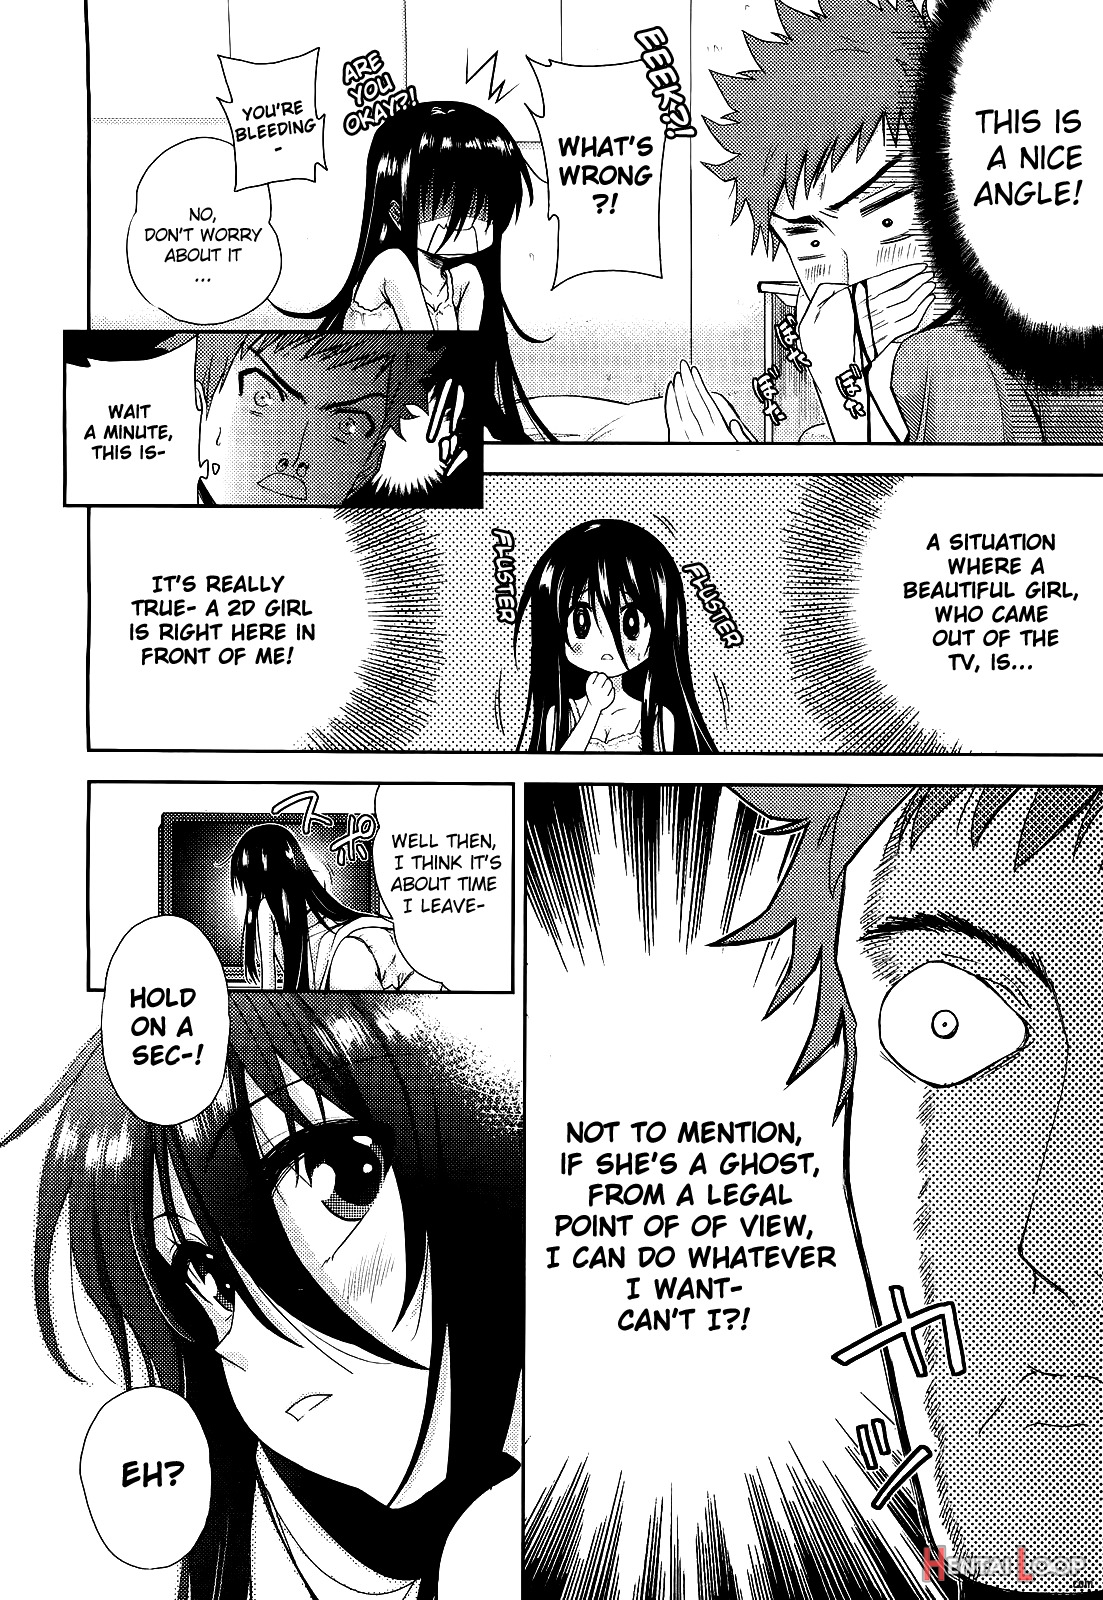 Two Dimensions Girlfriend Ch. 1-4 page 6